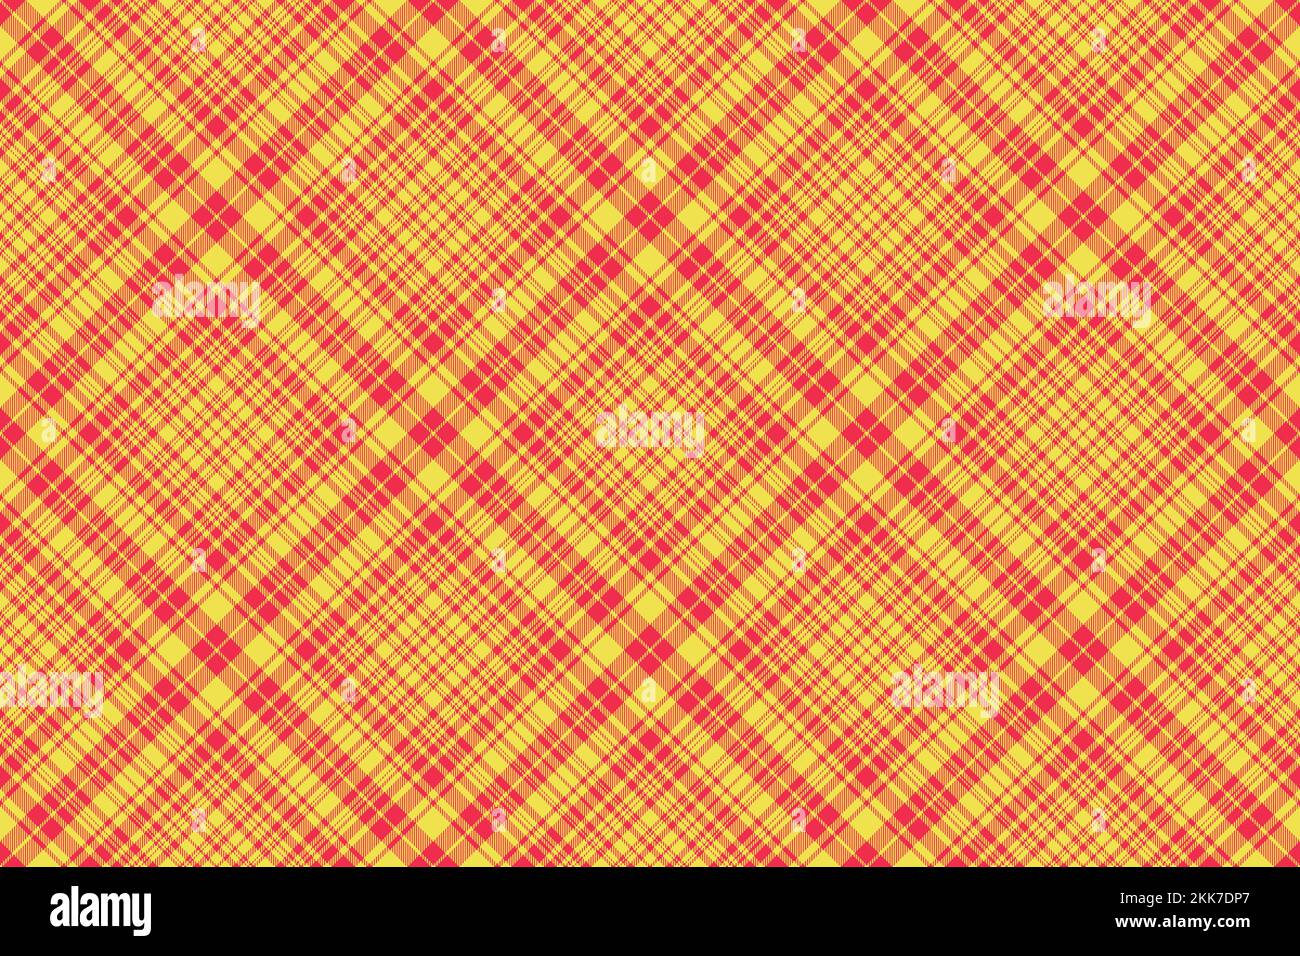 Pattern background tartan. Fabric check textile. Seamless texture vector plaid in yellow and red colors. Stock Vector